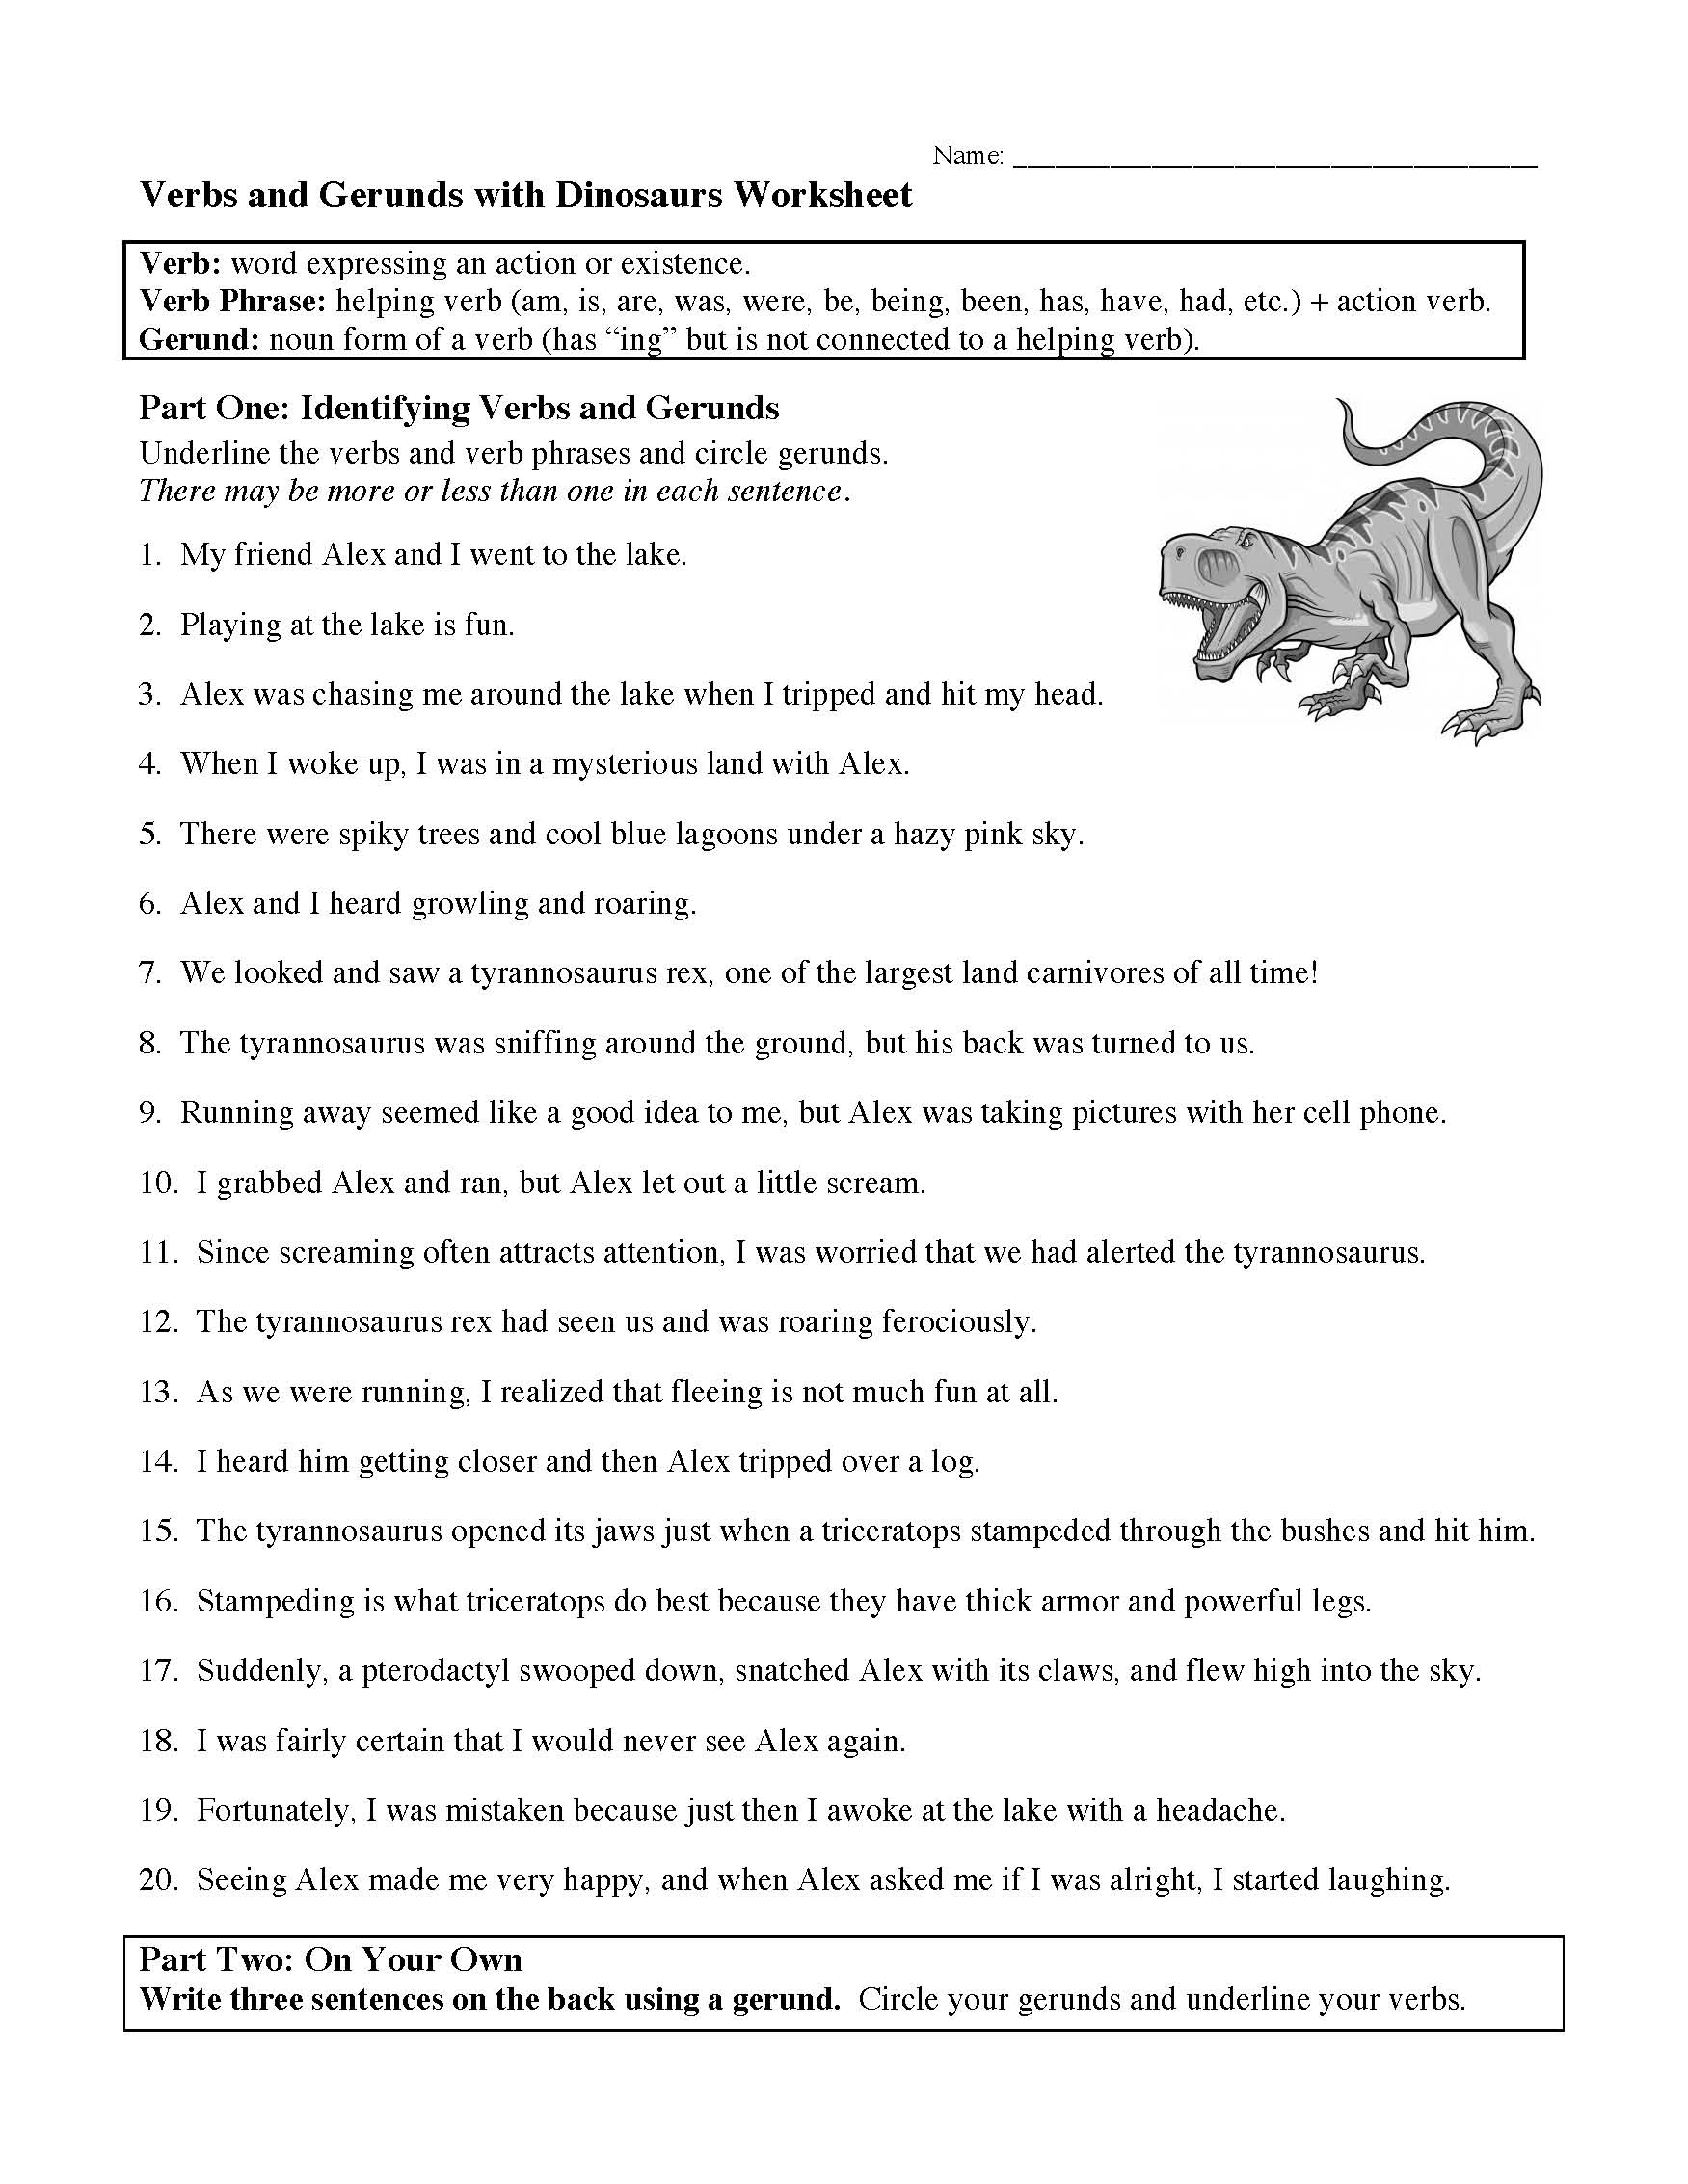 This is a preview image of the Verbs, Verbs of Being, and Gerunds Worksheet .